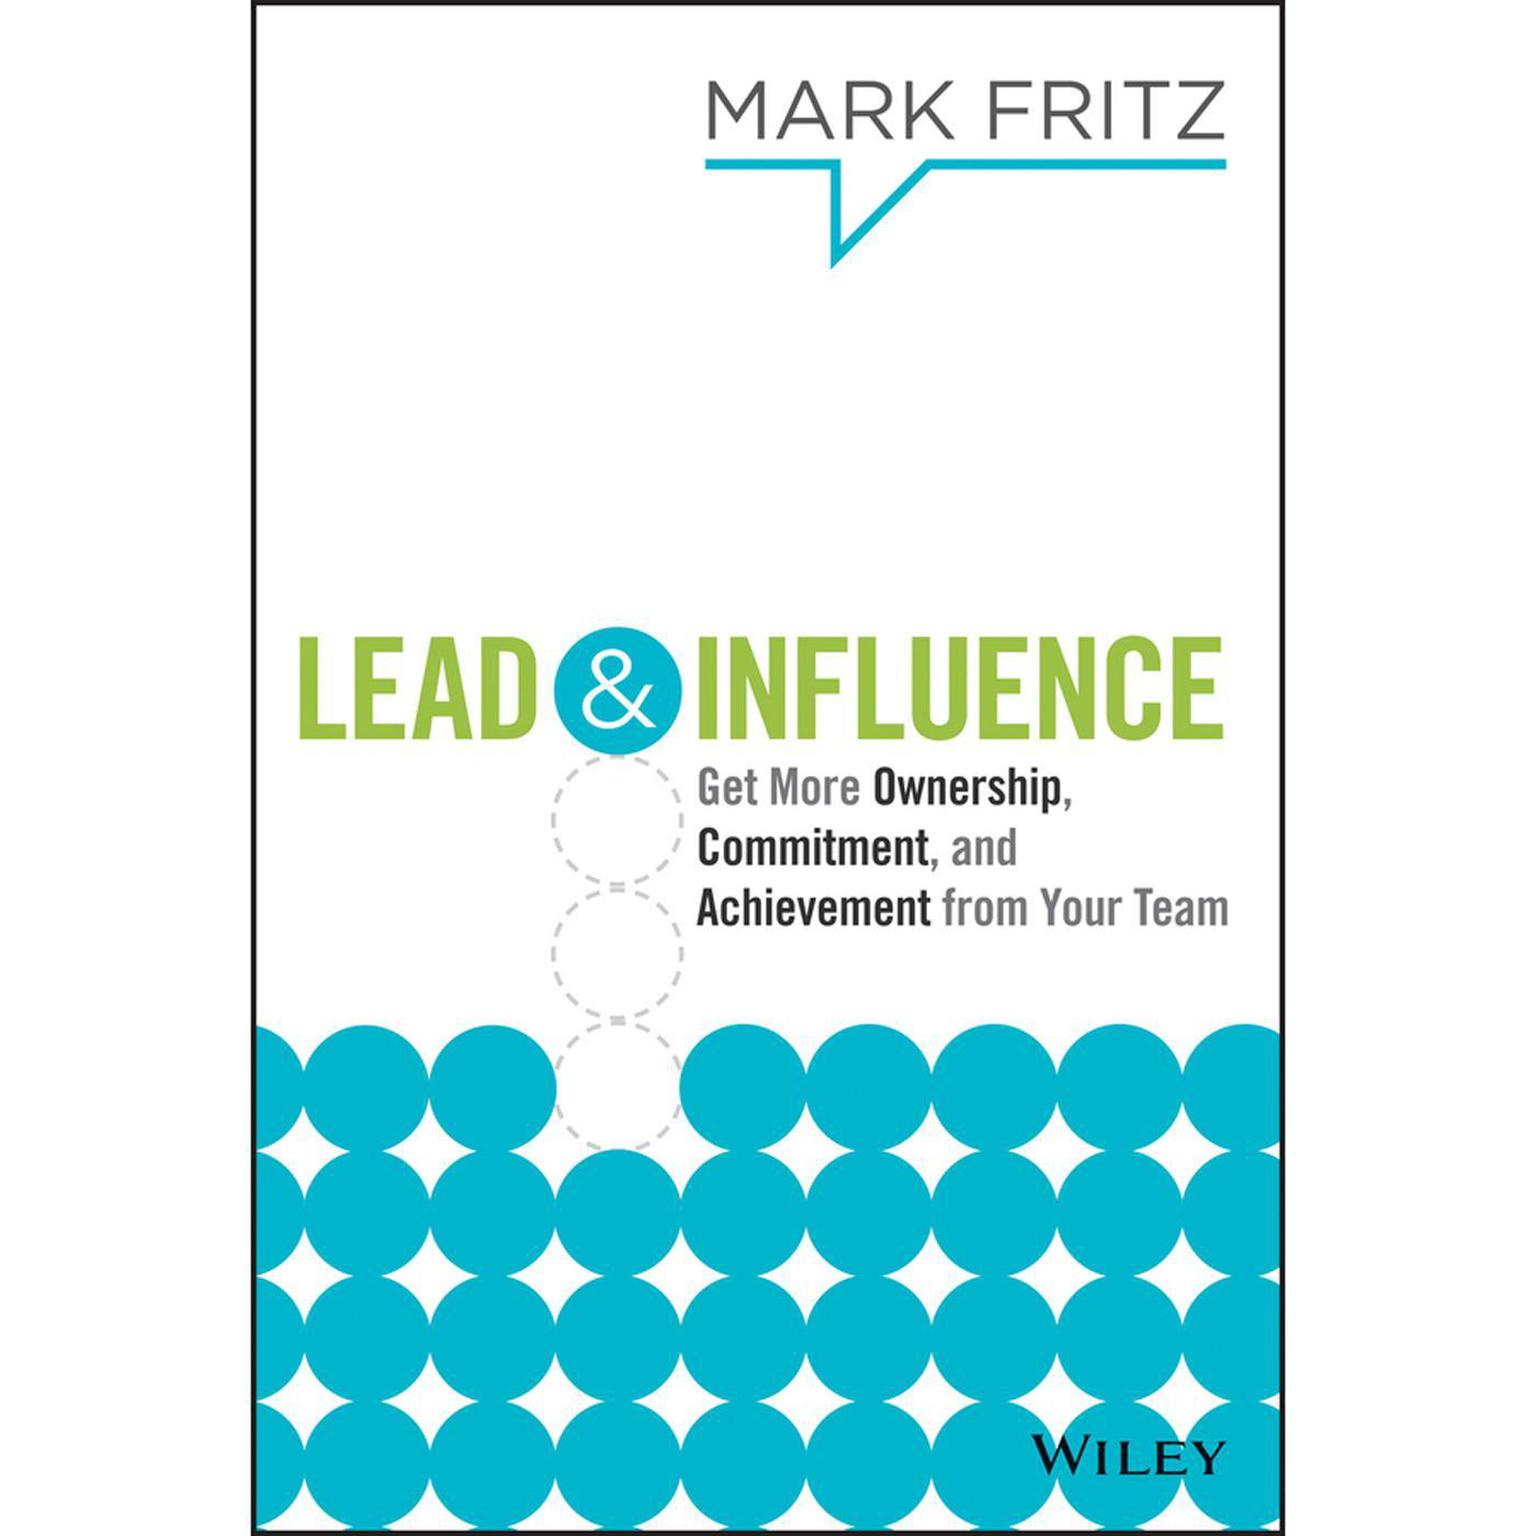 Lead & Influence: Get More Ownership, Commitment, and Achievement From Your Team Audiobook, by Mark Fritz